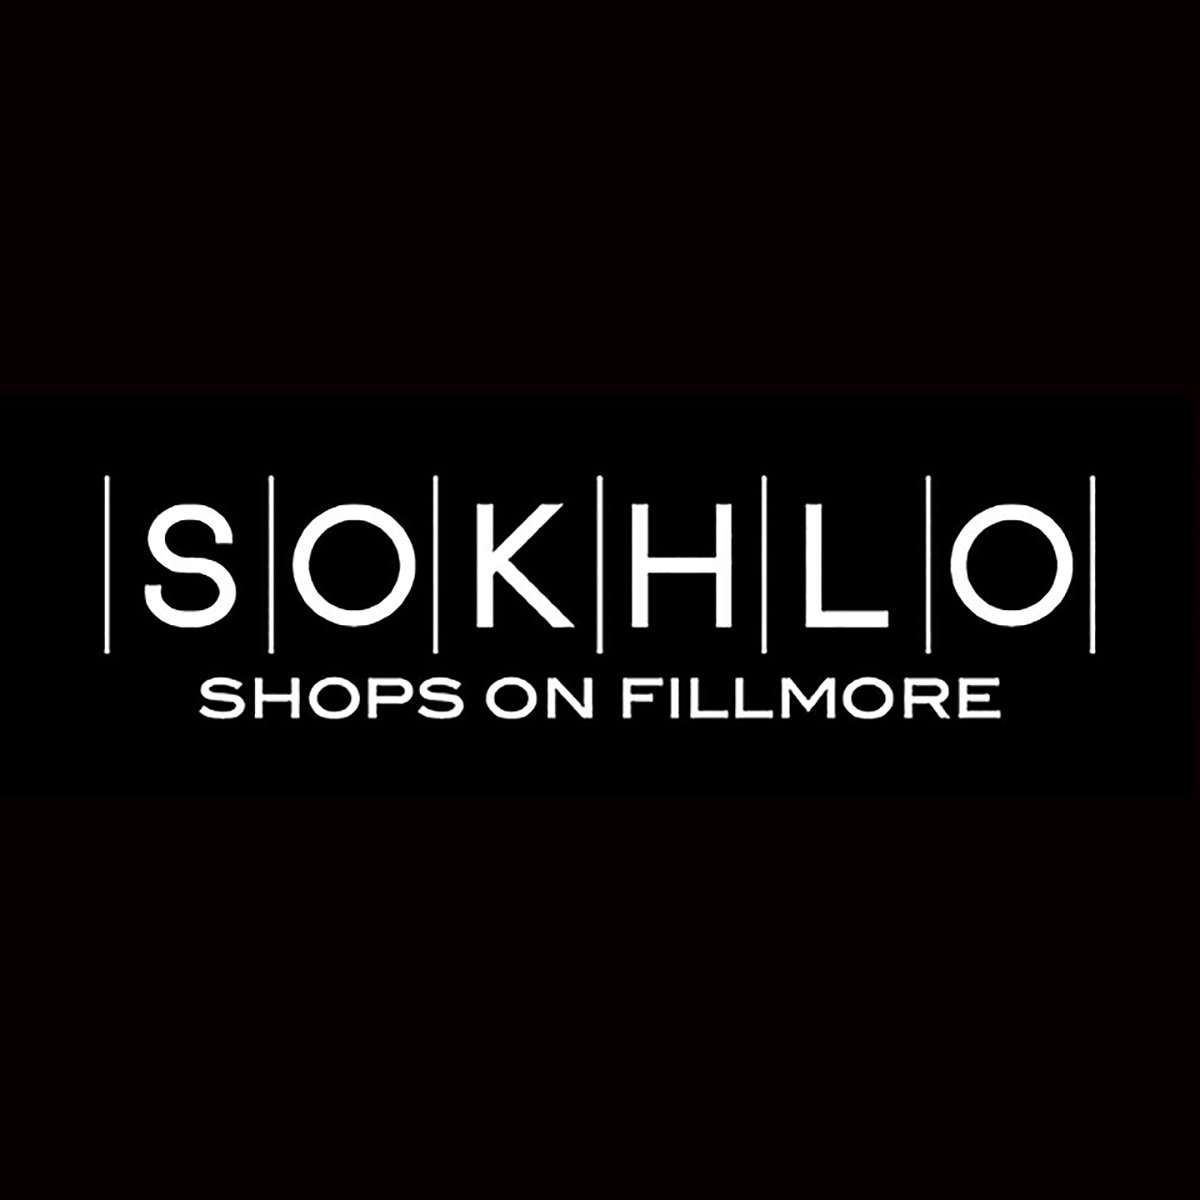 SoKhlo Shops is a San Francisco based Co-Retail space focused on providing brands with access to